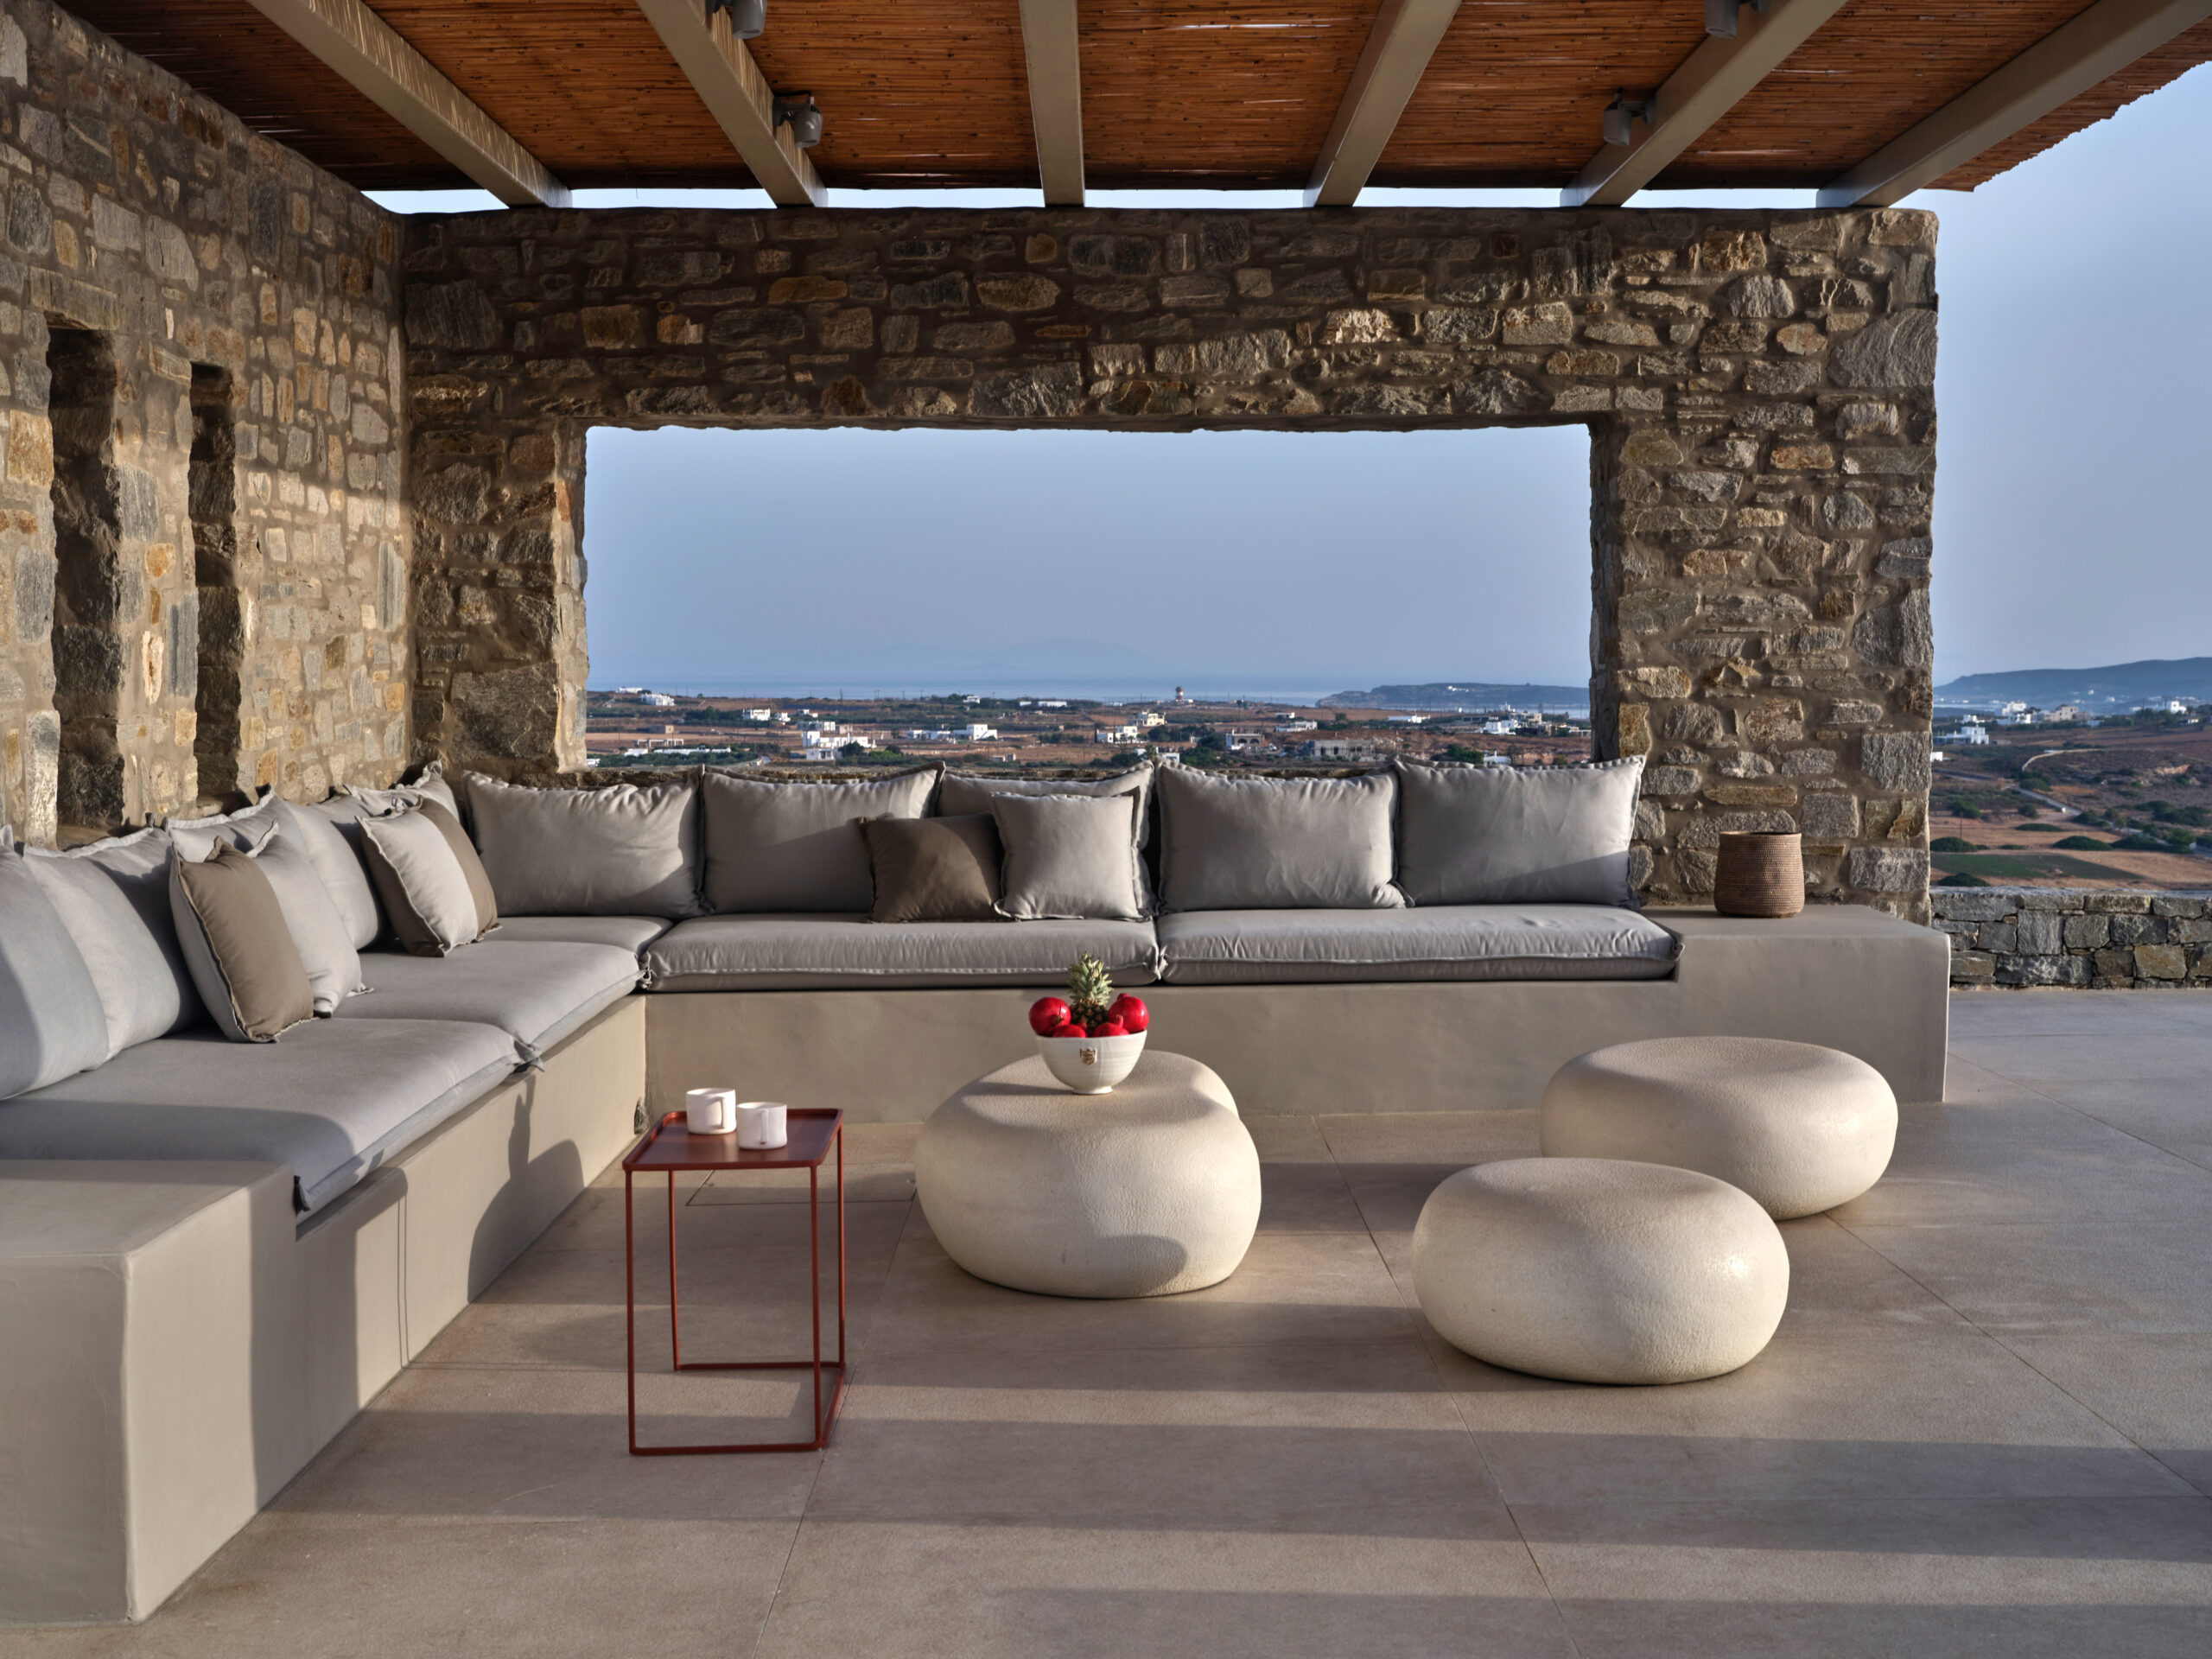 Shaded lounge area with views to the sea.